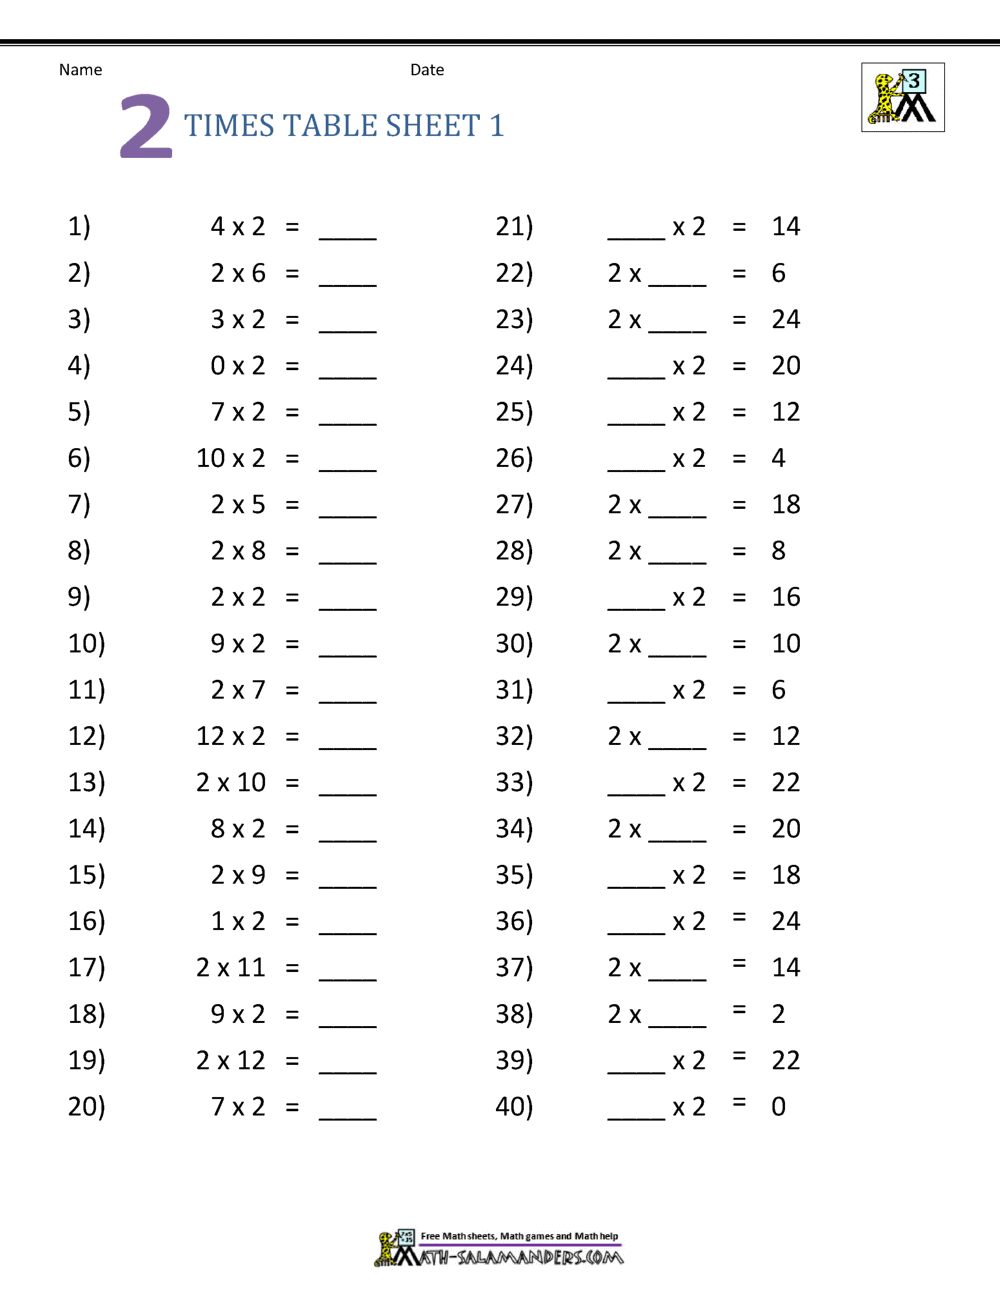 Multiplication Table Worksheets Grade 20 Pertaining To 2 Times Table Worksheet